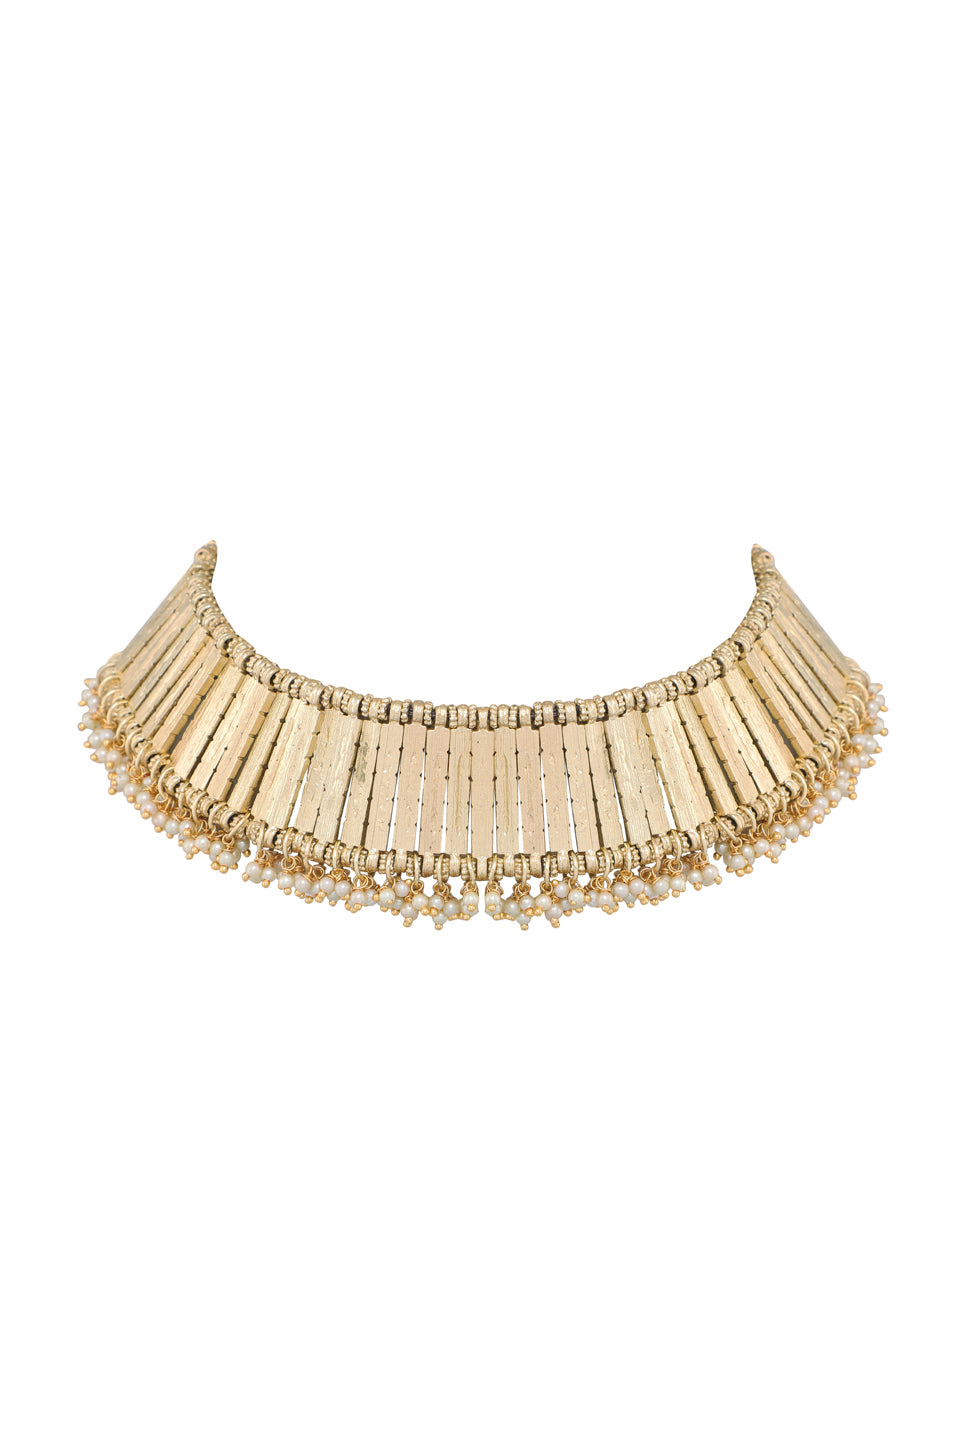 Shahi Pearl Gold Necklace